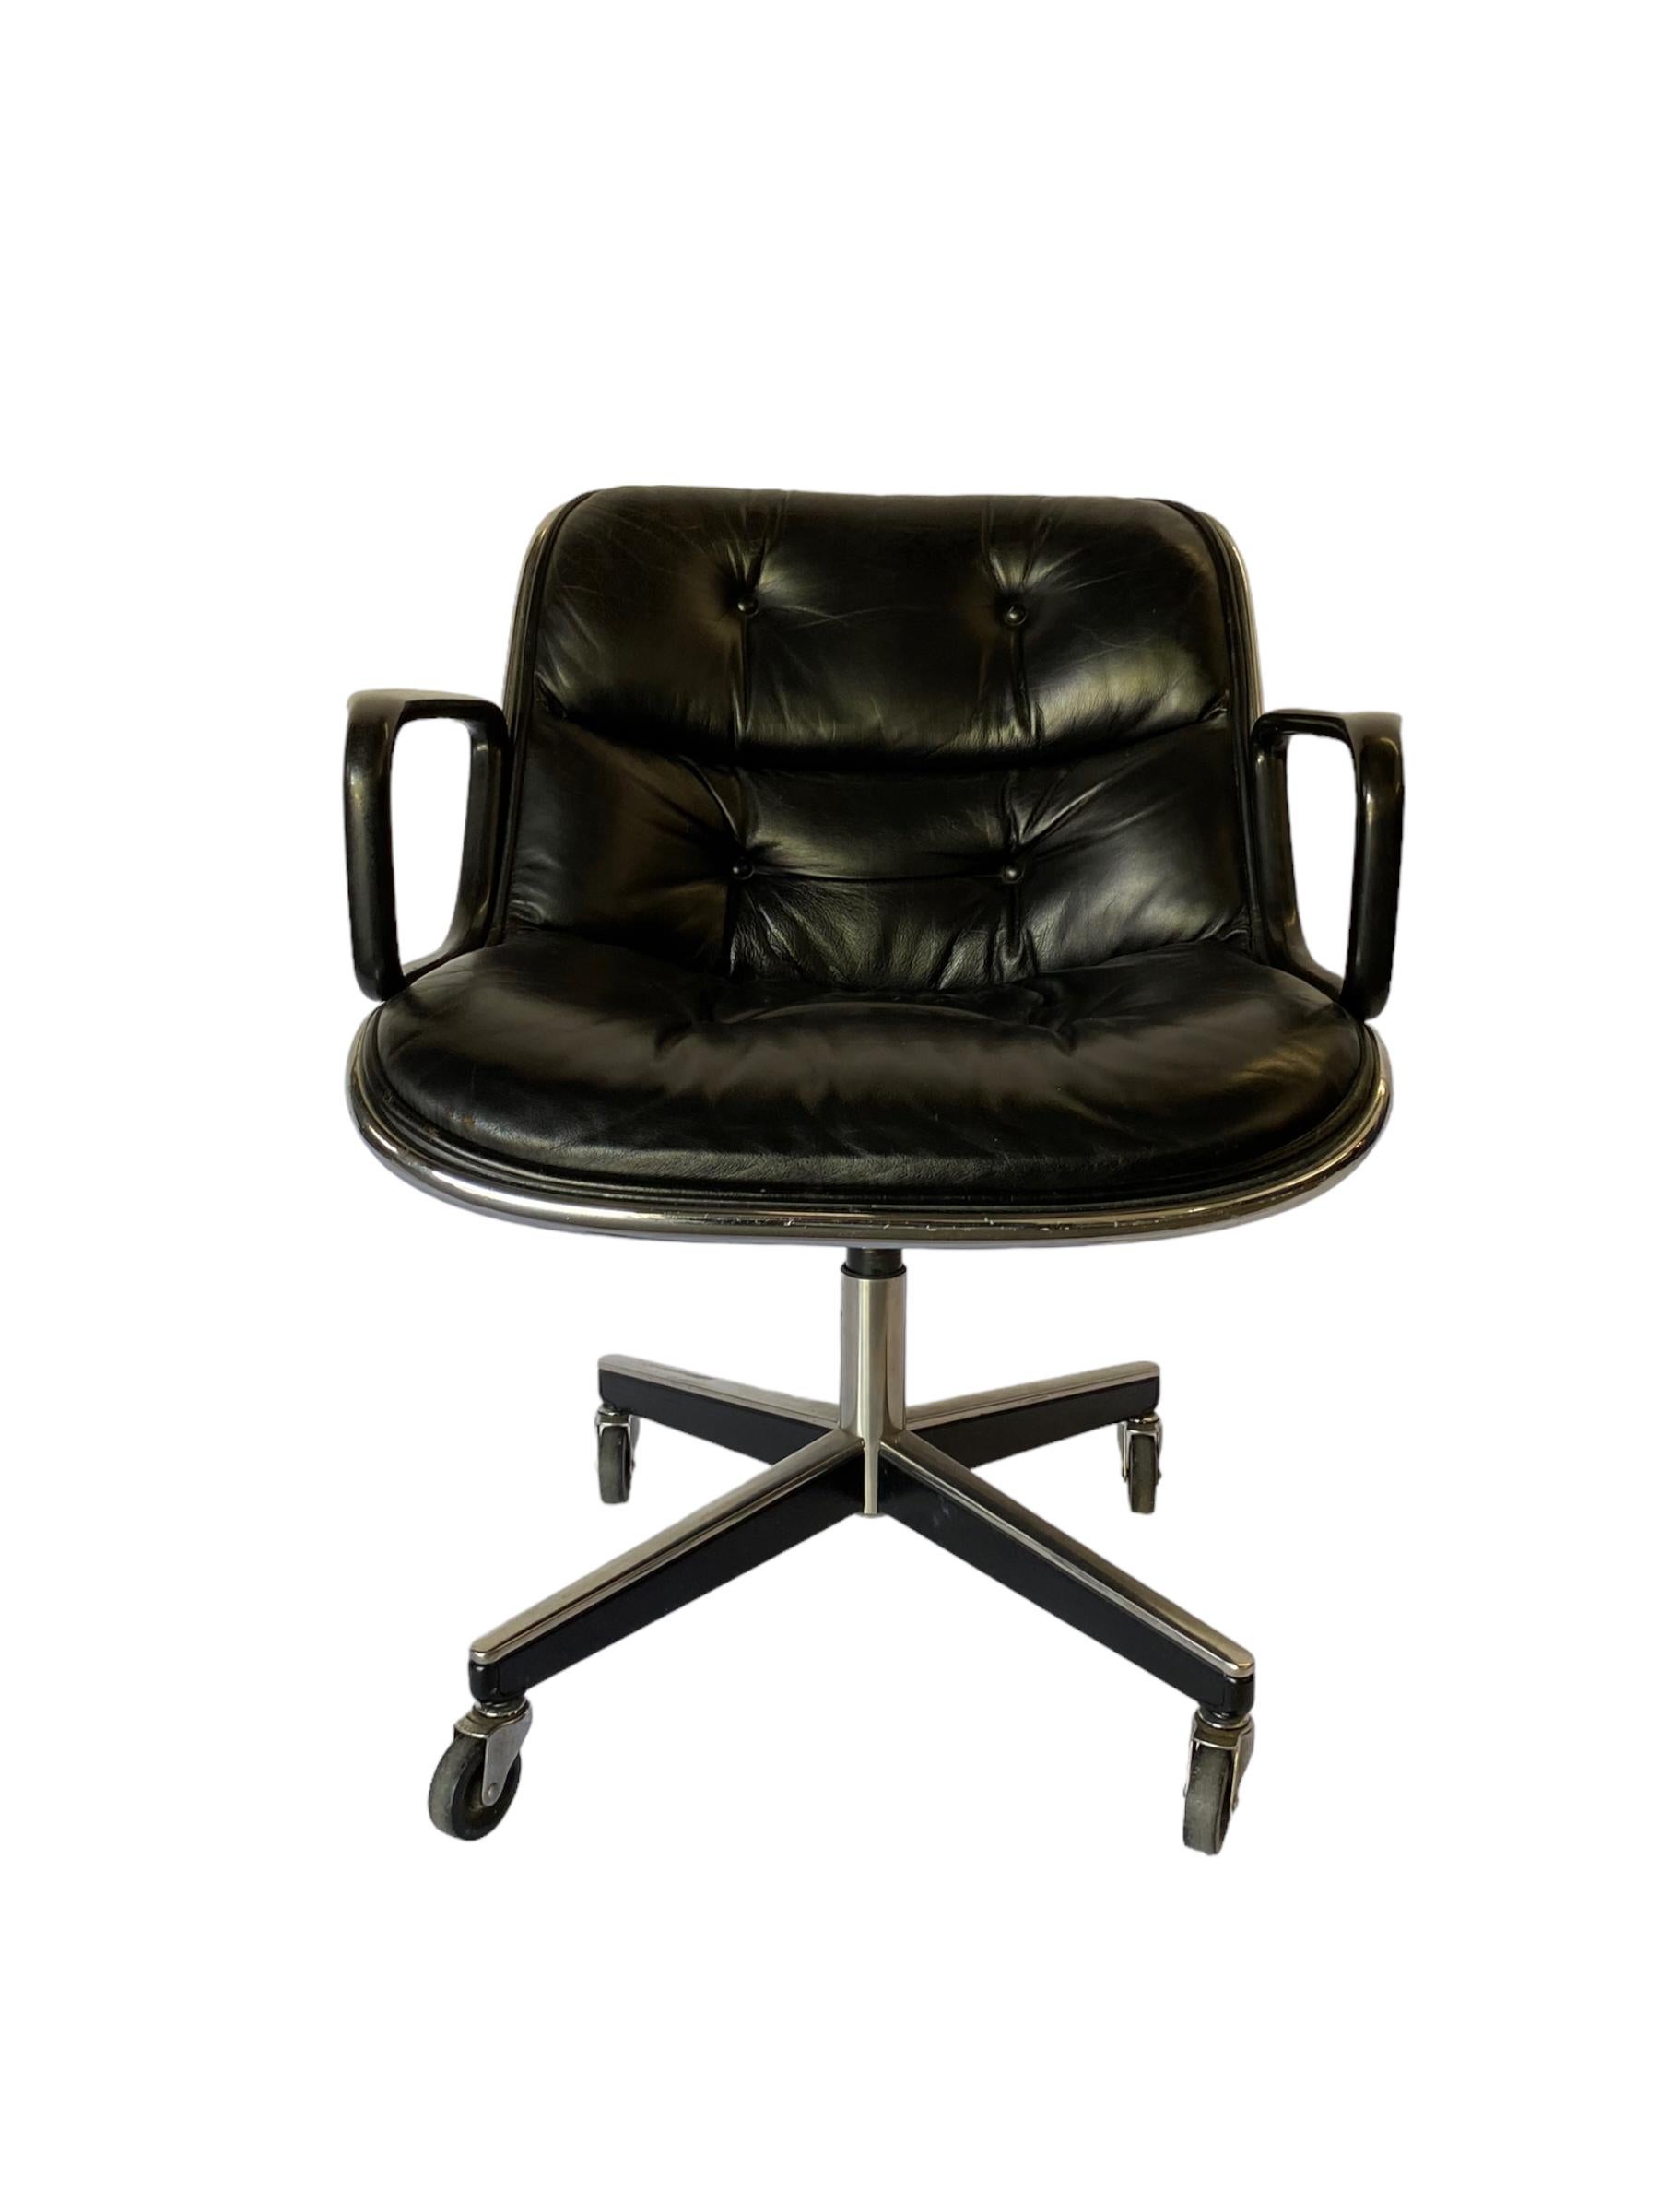 Vintage Charles Pollock for Knoll executive chair in black blue leather. This executive desk chair has a tilt and swivel base with adjustable height. Base with all wheels in working condition. Good vintage condition, wear consistent with age and